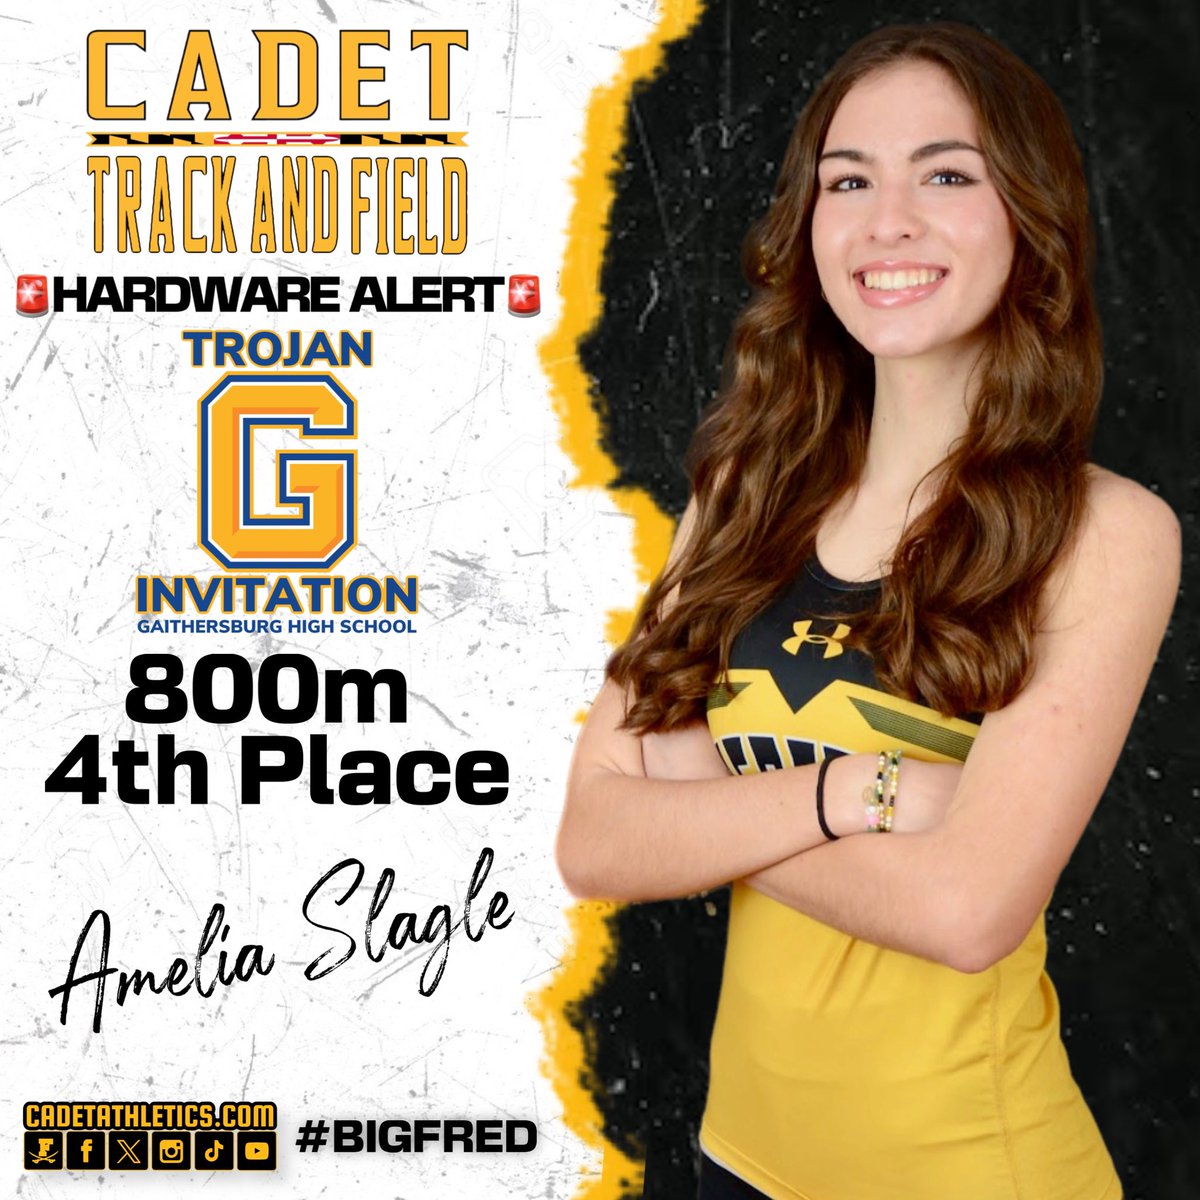 ⚡️Cadetathletics.com Breaking News 
🏅🚨HARDWARE ALERT🚨🏅

Cadet Amelia Slagle places 4th in the 800m race  at the Trojan Invitational today at Gaithersburg High School with a time of 2:23.15.

⚔️ | #BigFred | ⬛️🟨 | #ProtectTheParkway